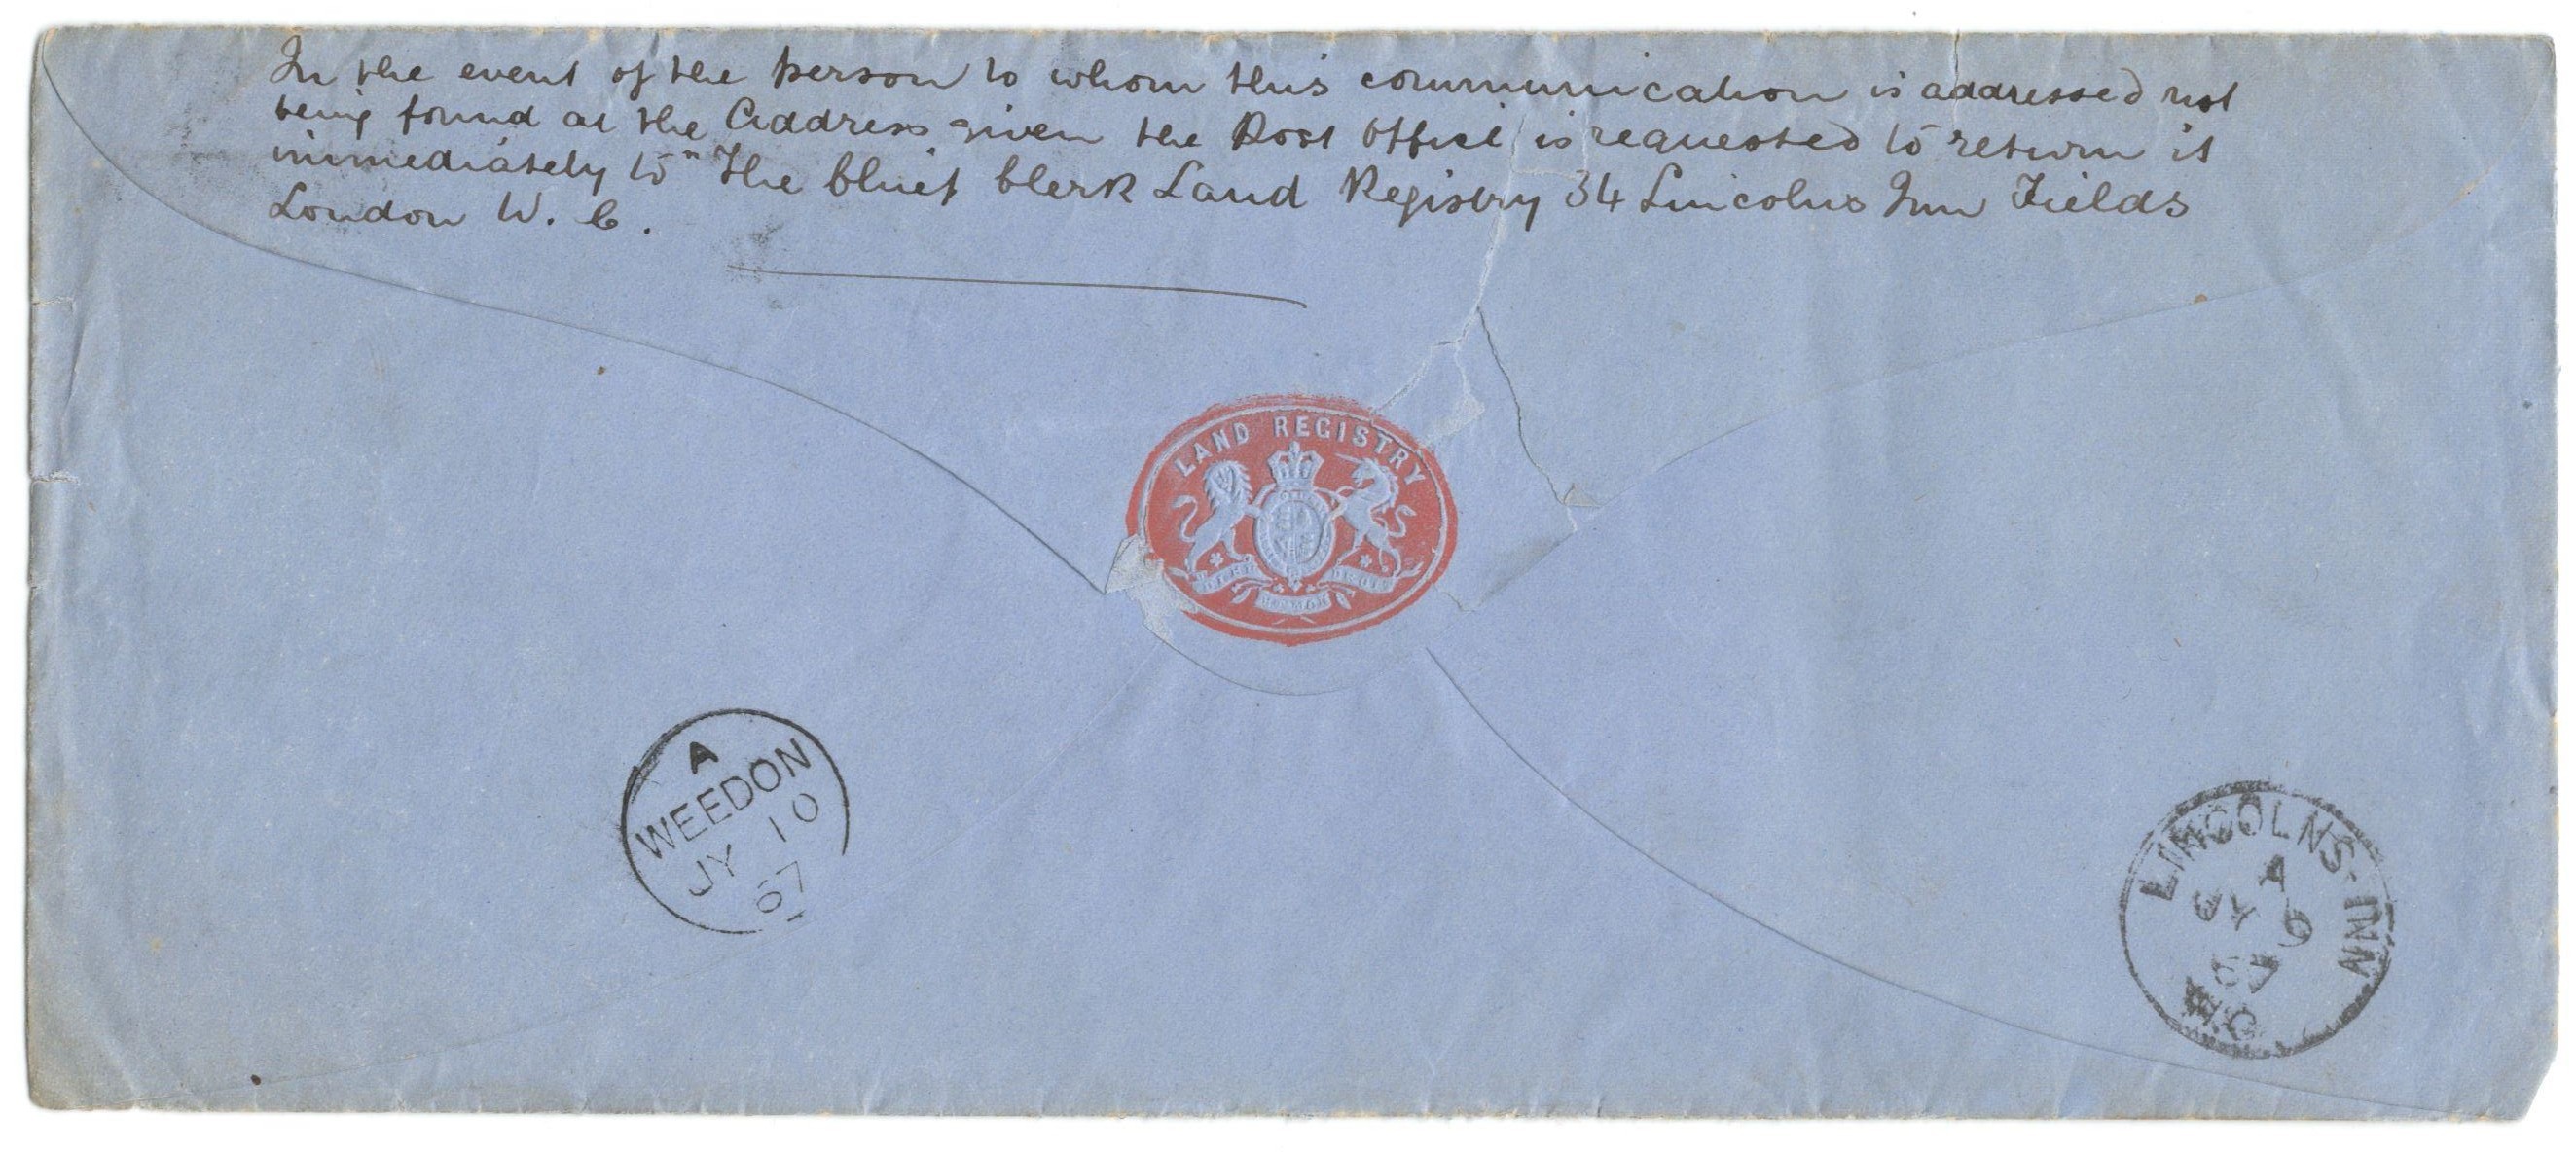 COVER FROM 1867 TO LAND REGISTRY WITH 4 PENCE AND ACCOMPANYING LETTER WITH FISCAL STAMP - Image 2 of 3